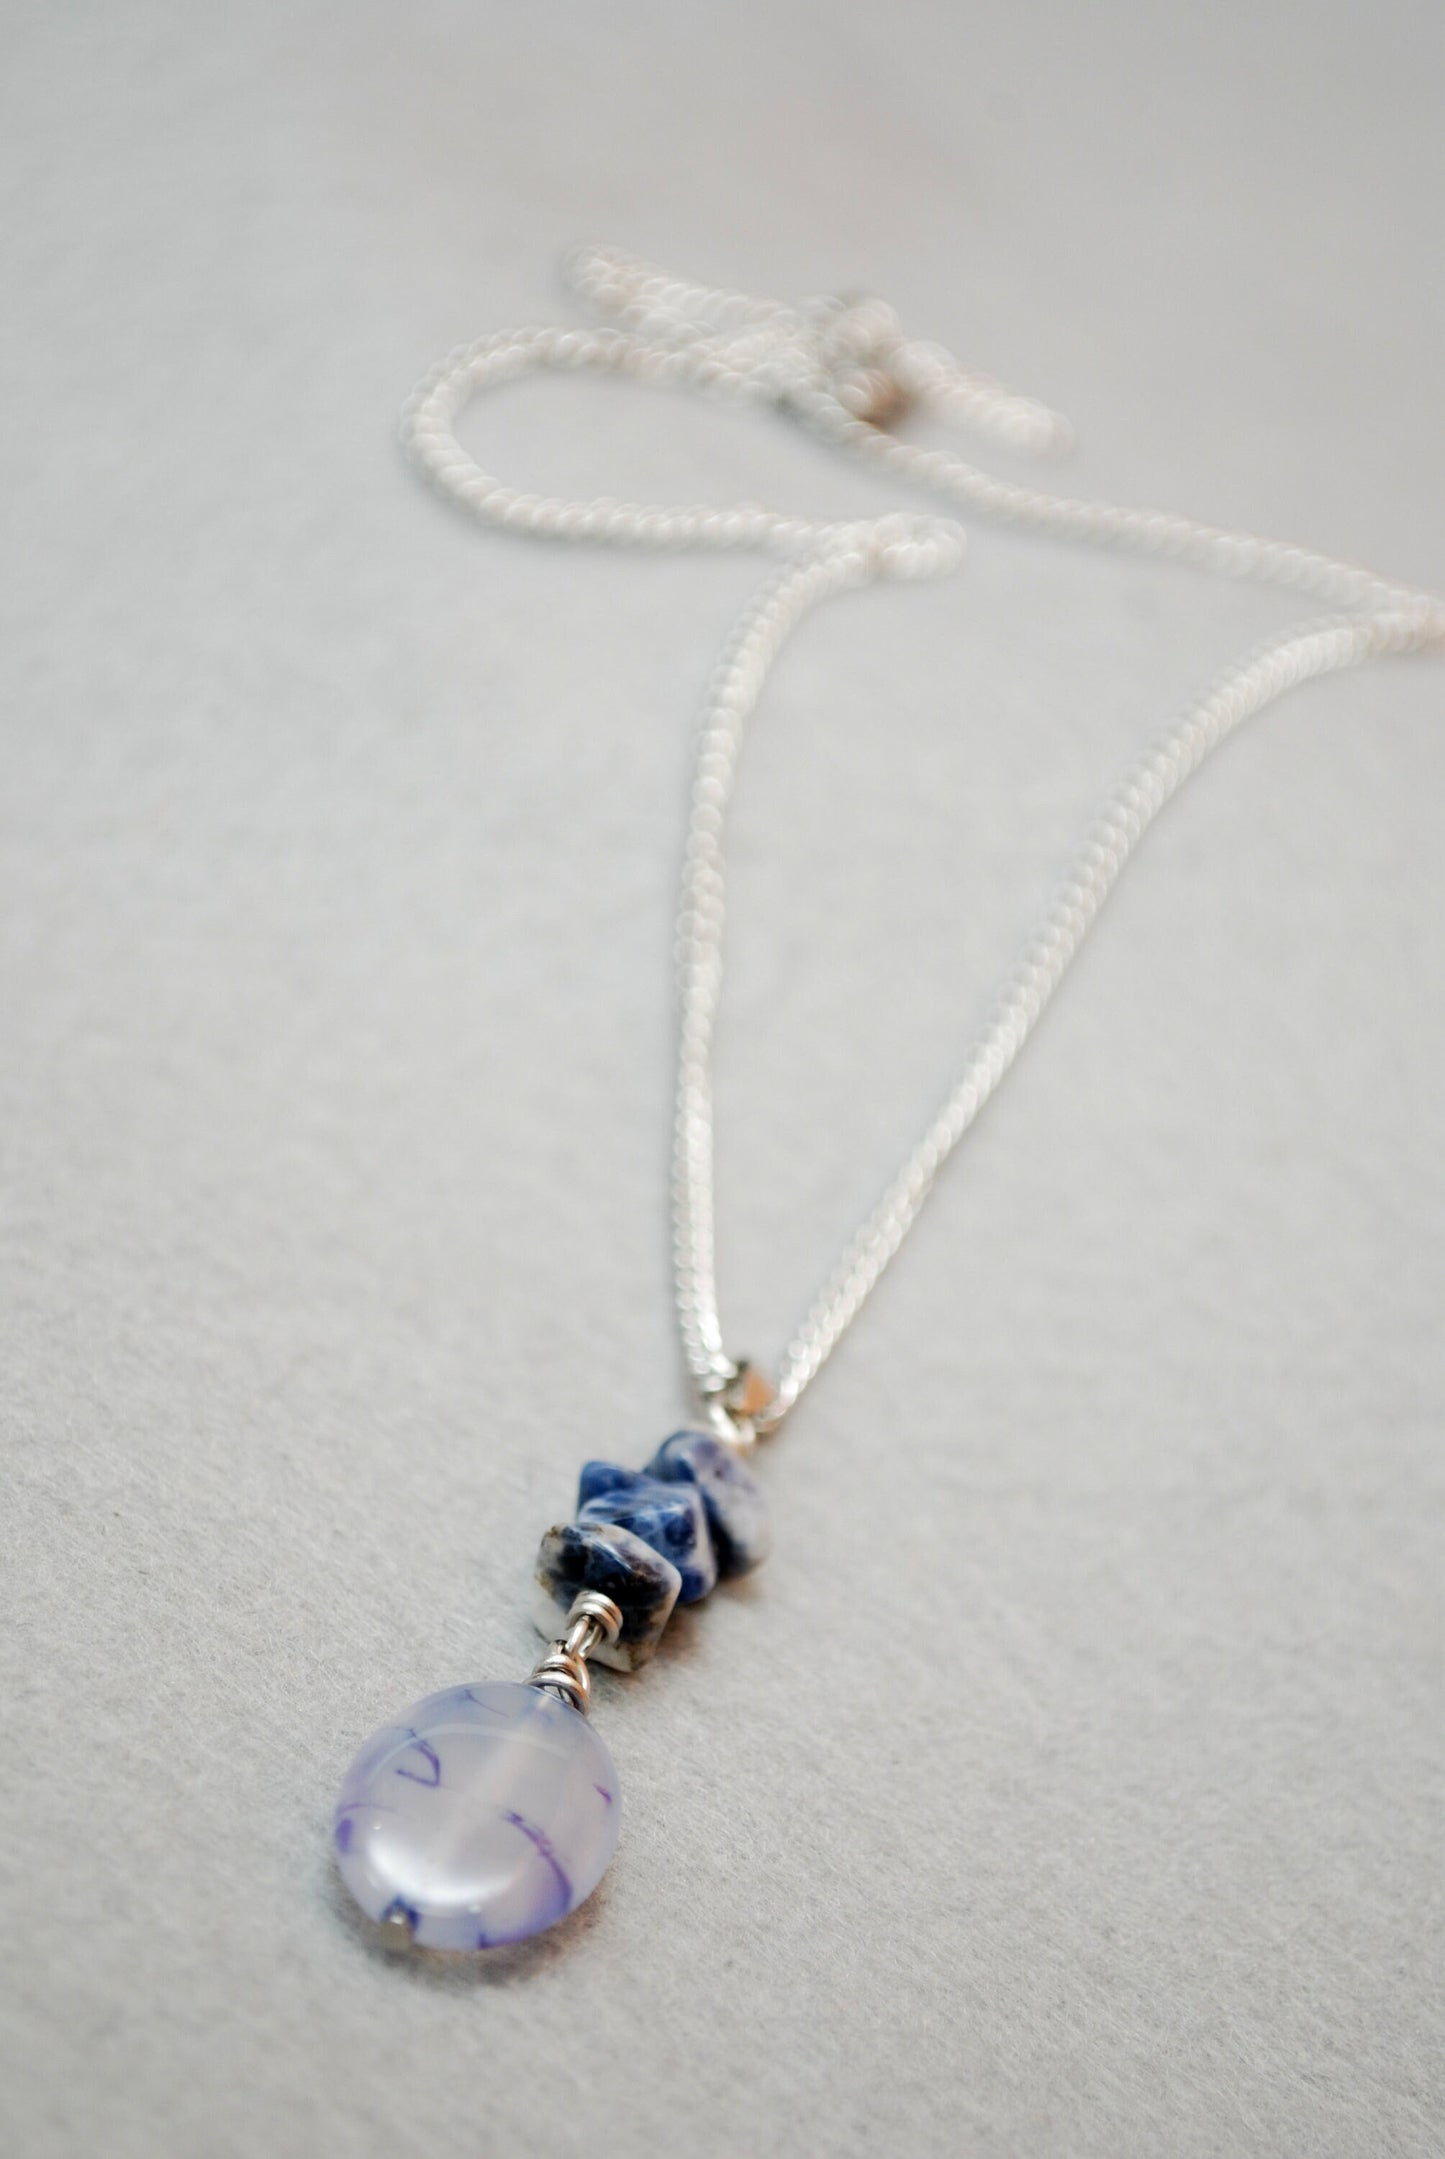 Lapis lazuli and dragon agate necklace, stainless steel necklace with gemstone accents, Estibela design, Elegant pendant for women